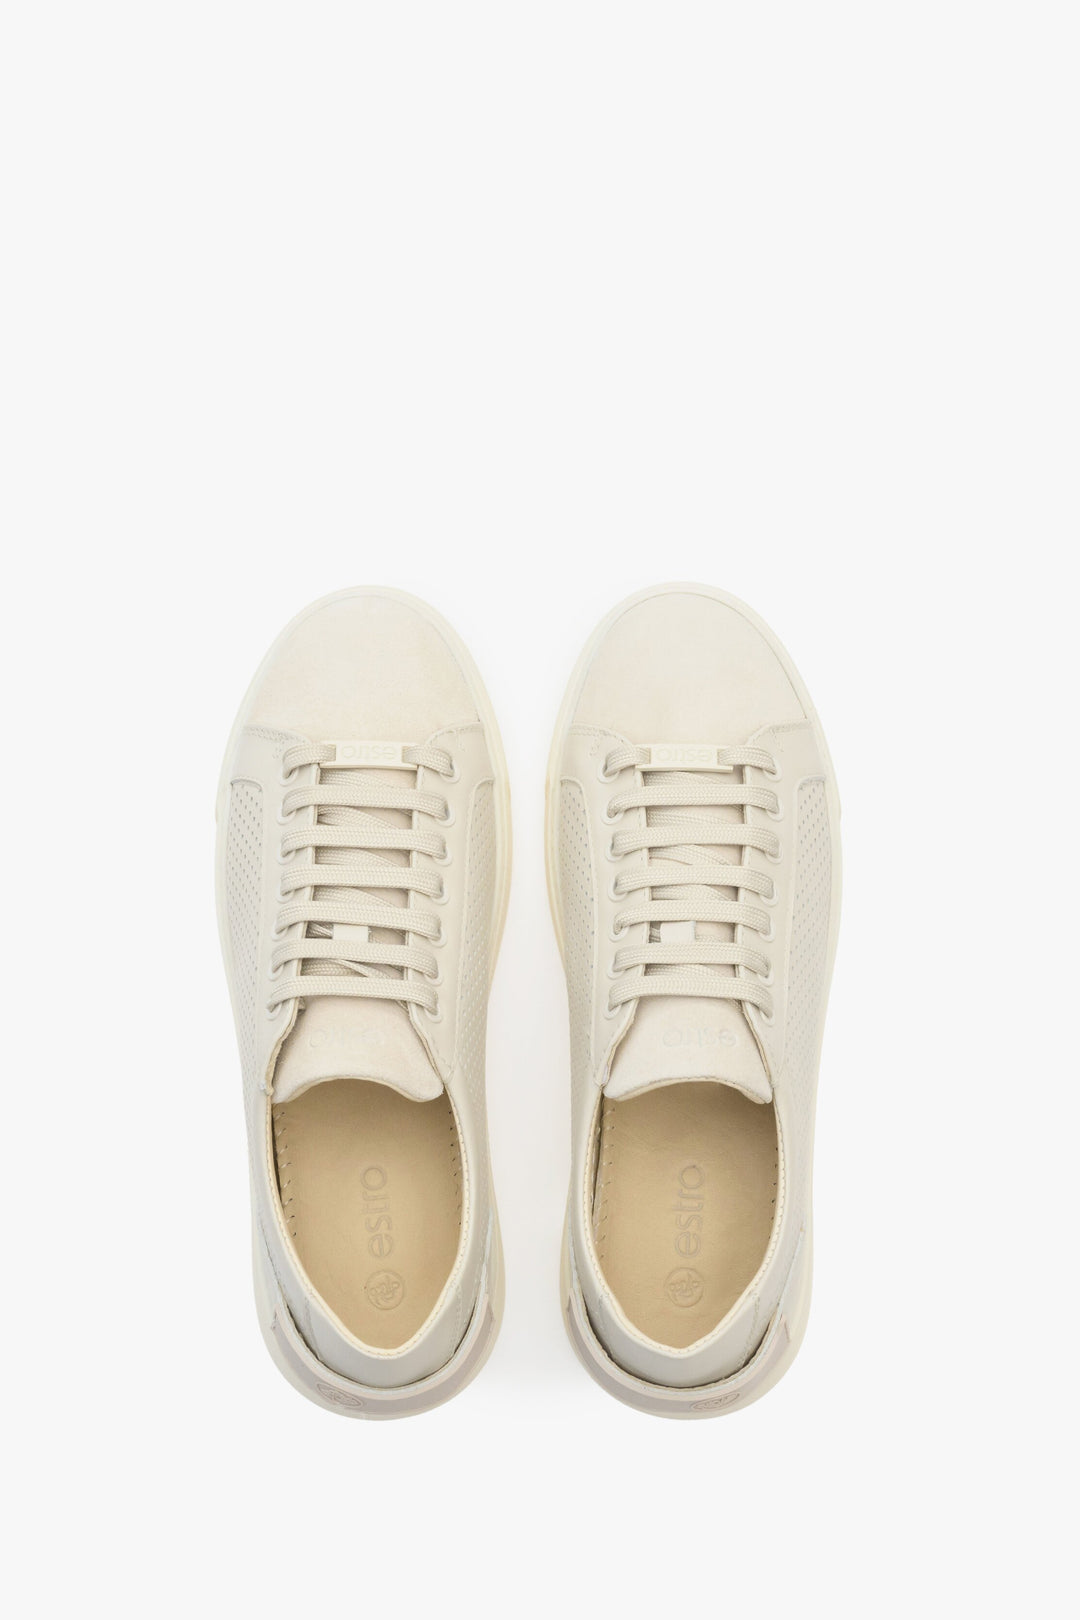 Women's beige leather sneakers with perforation - presentation of the footwear from above.